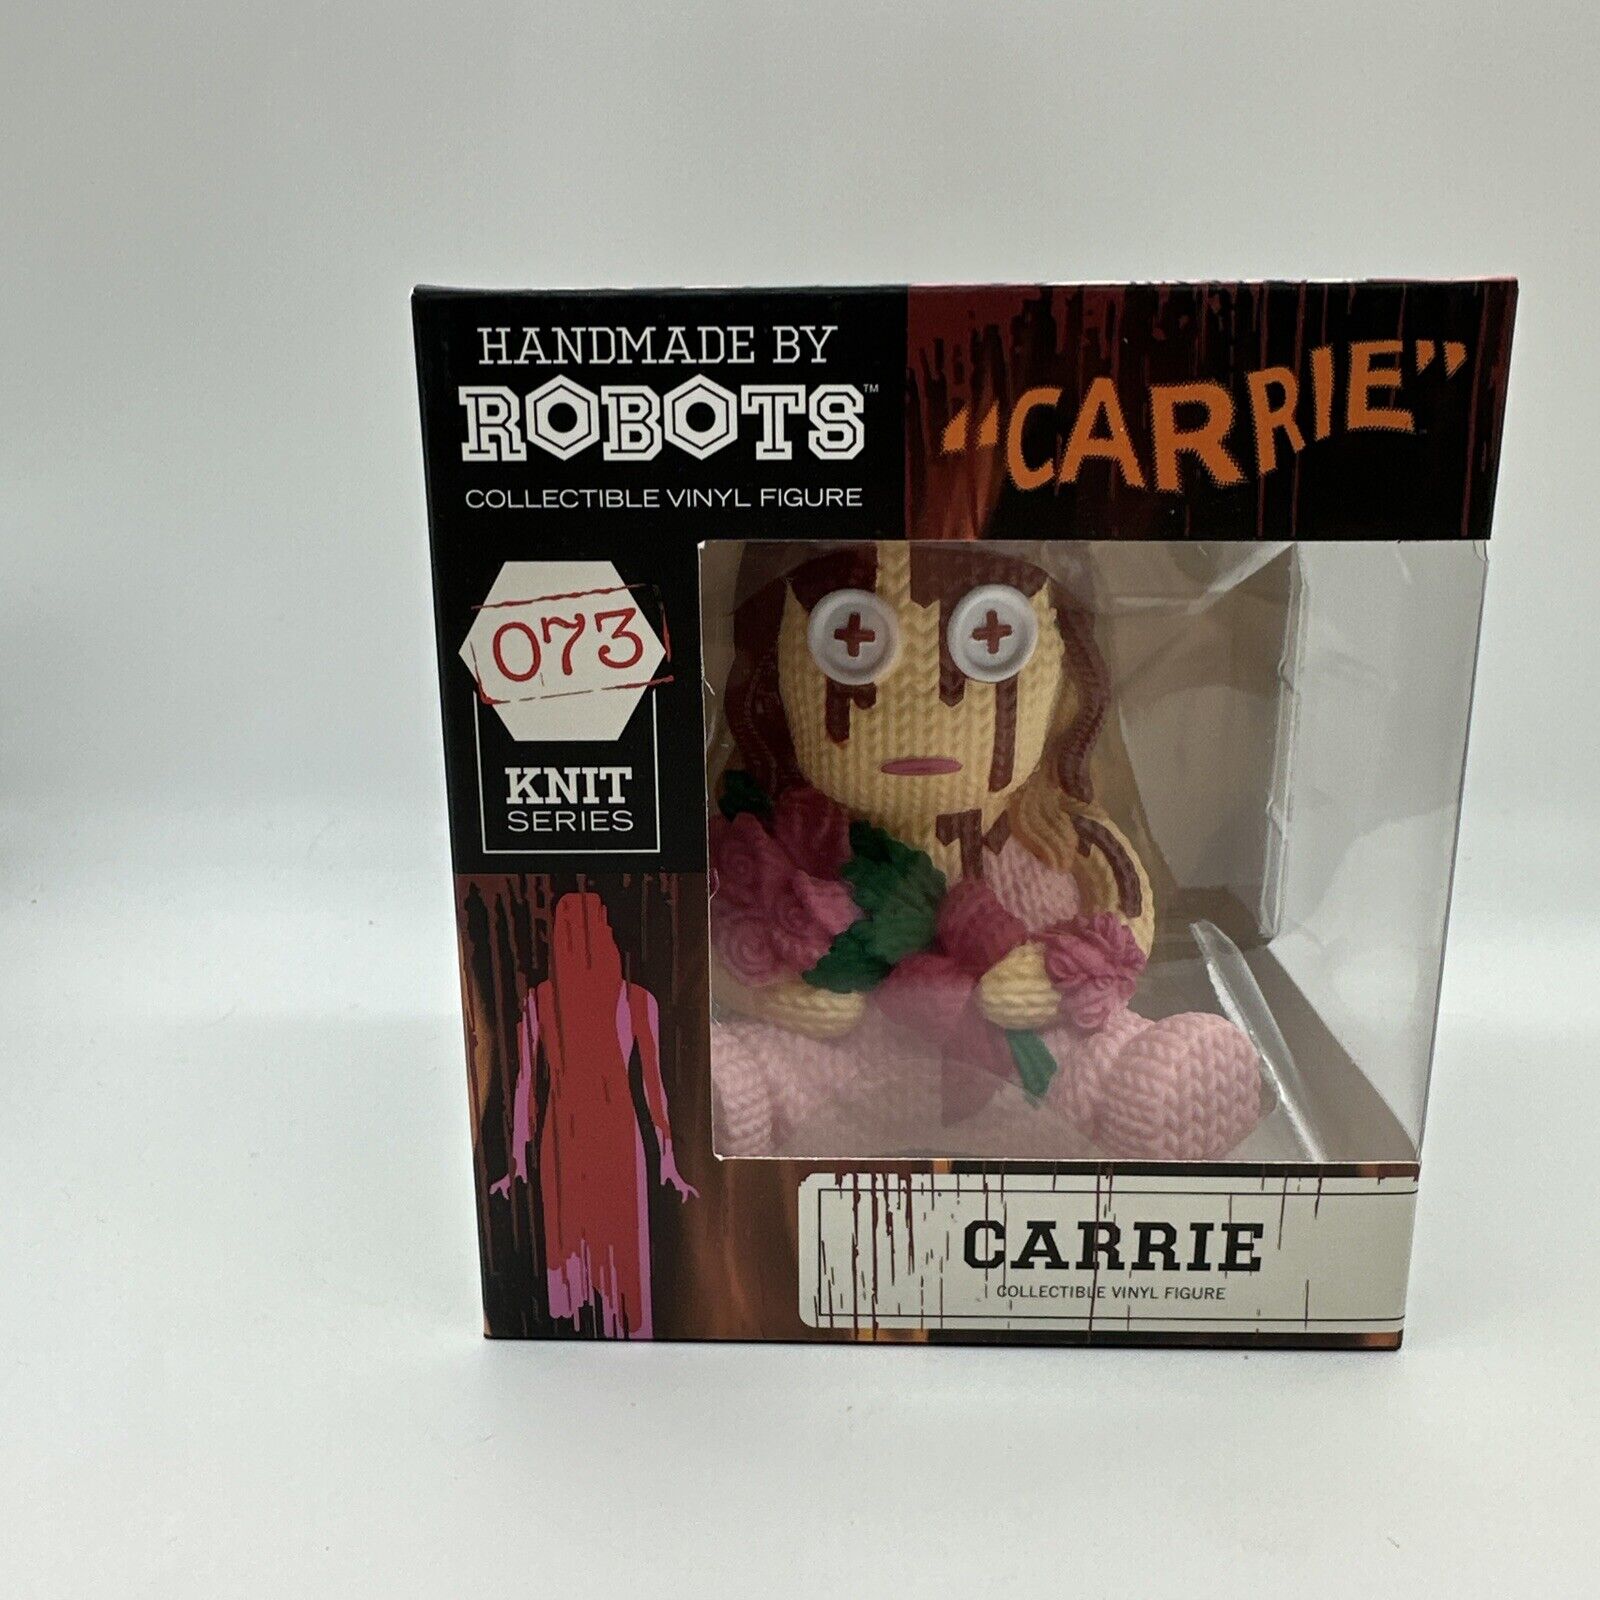 CARRIE 073 Knit Series Horror Vinyl Figure Handmade By Robots IN STOCK NEW